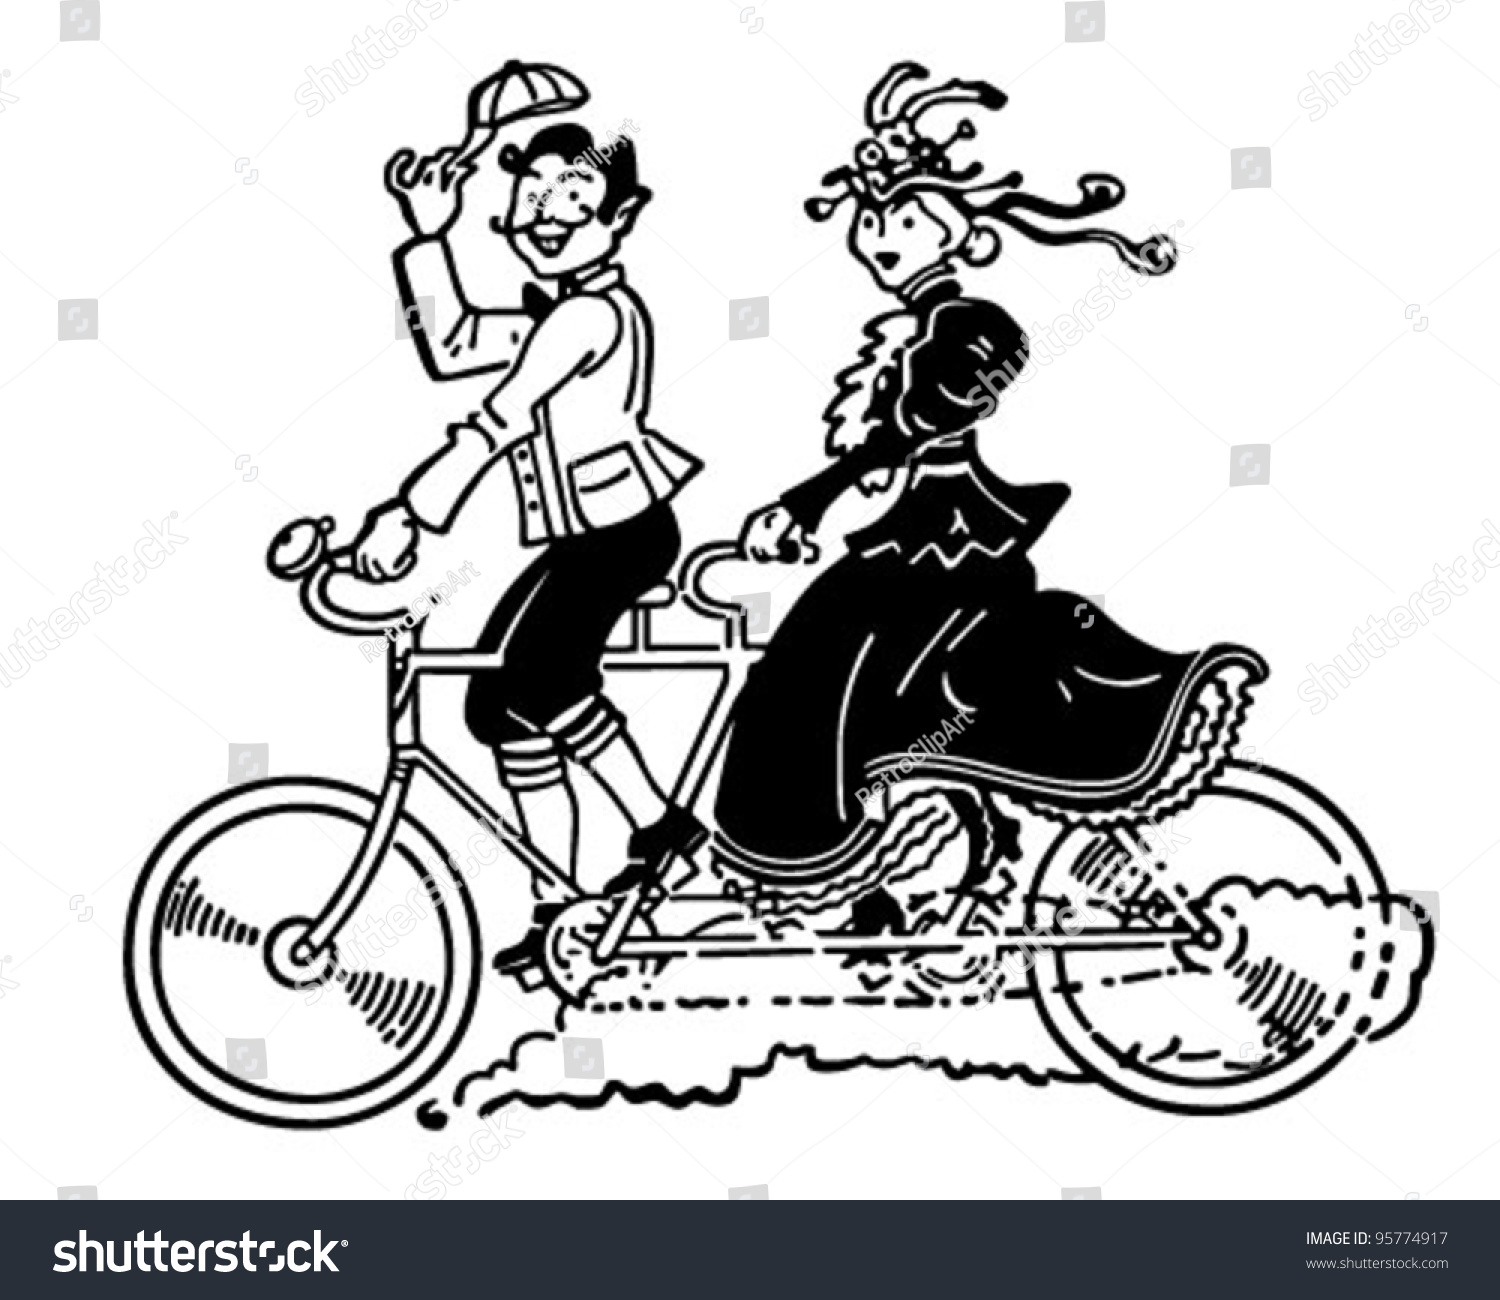 bicycle built for two clipart - photo #2